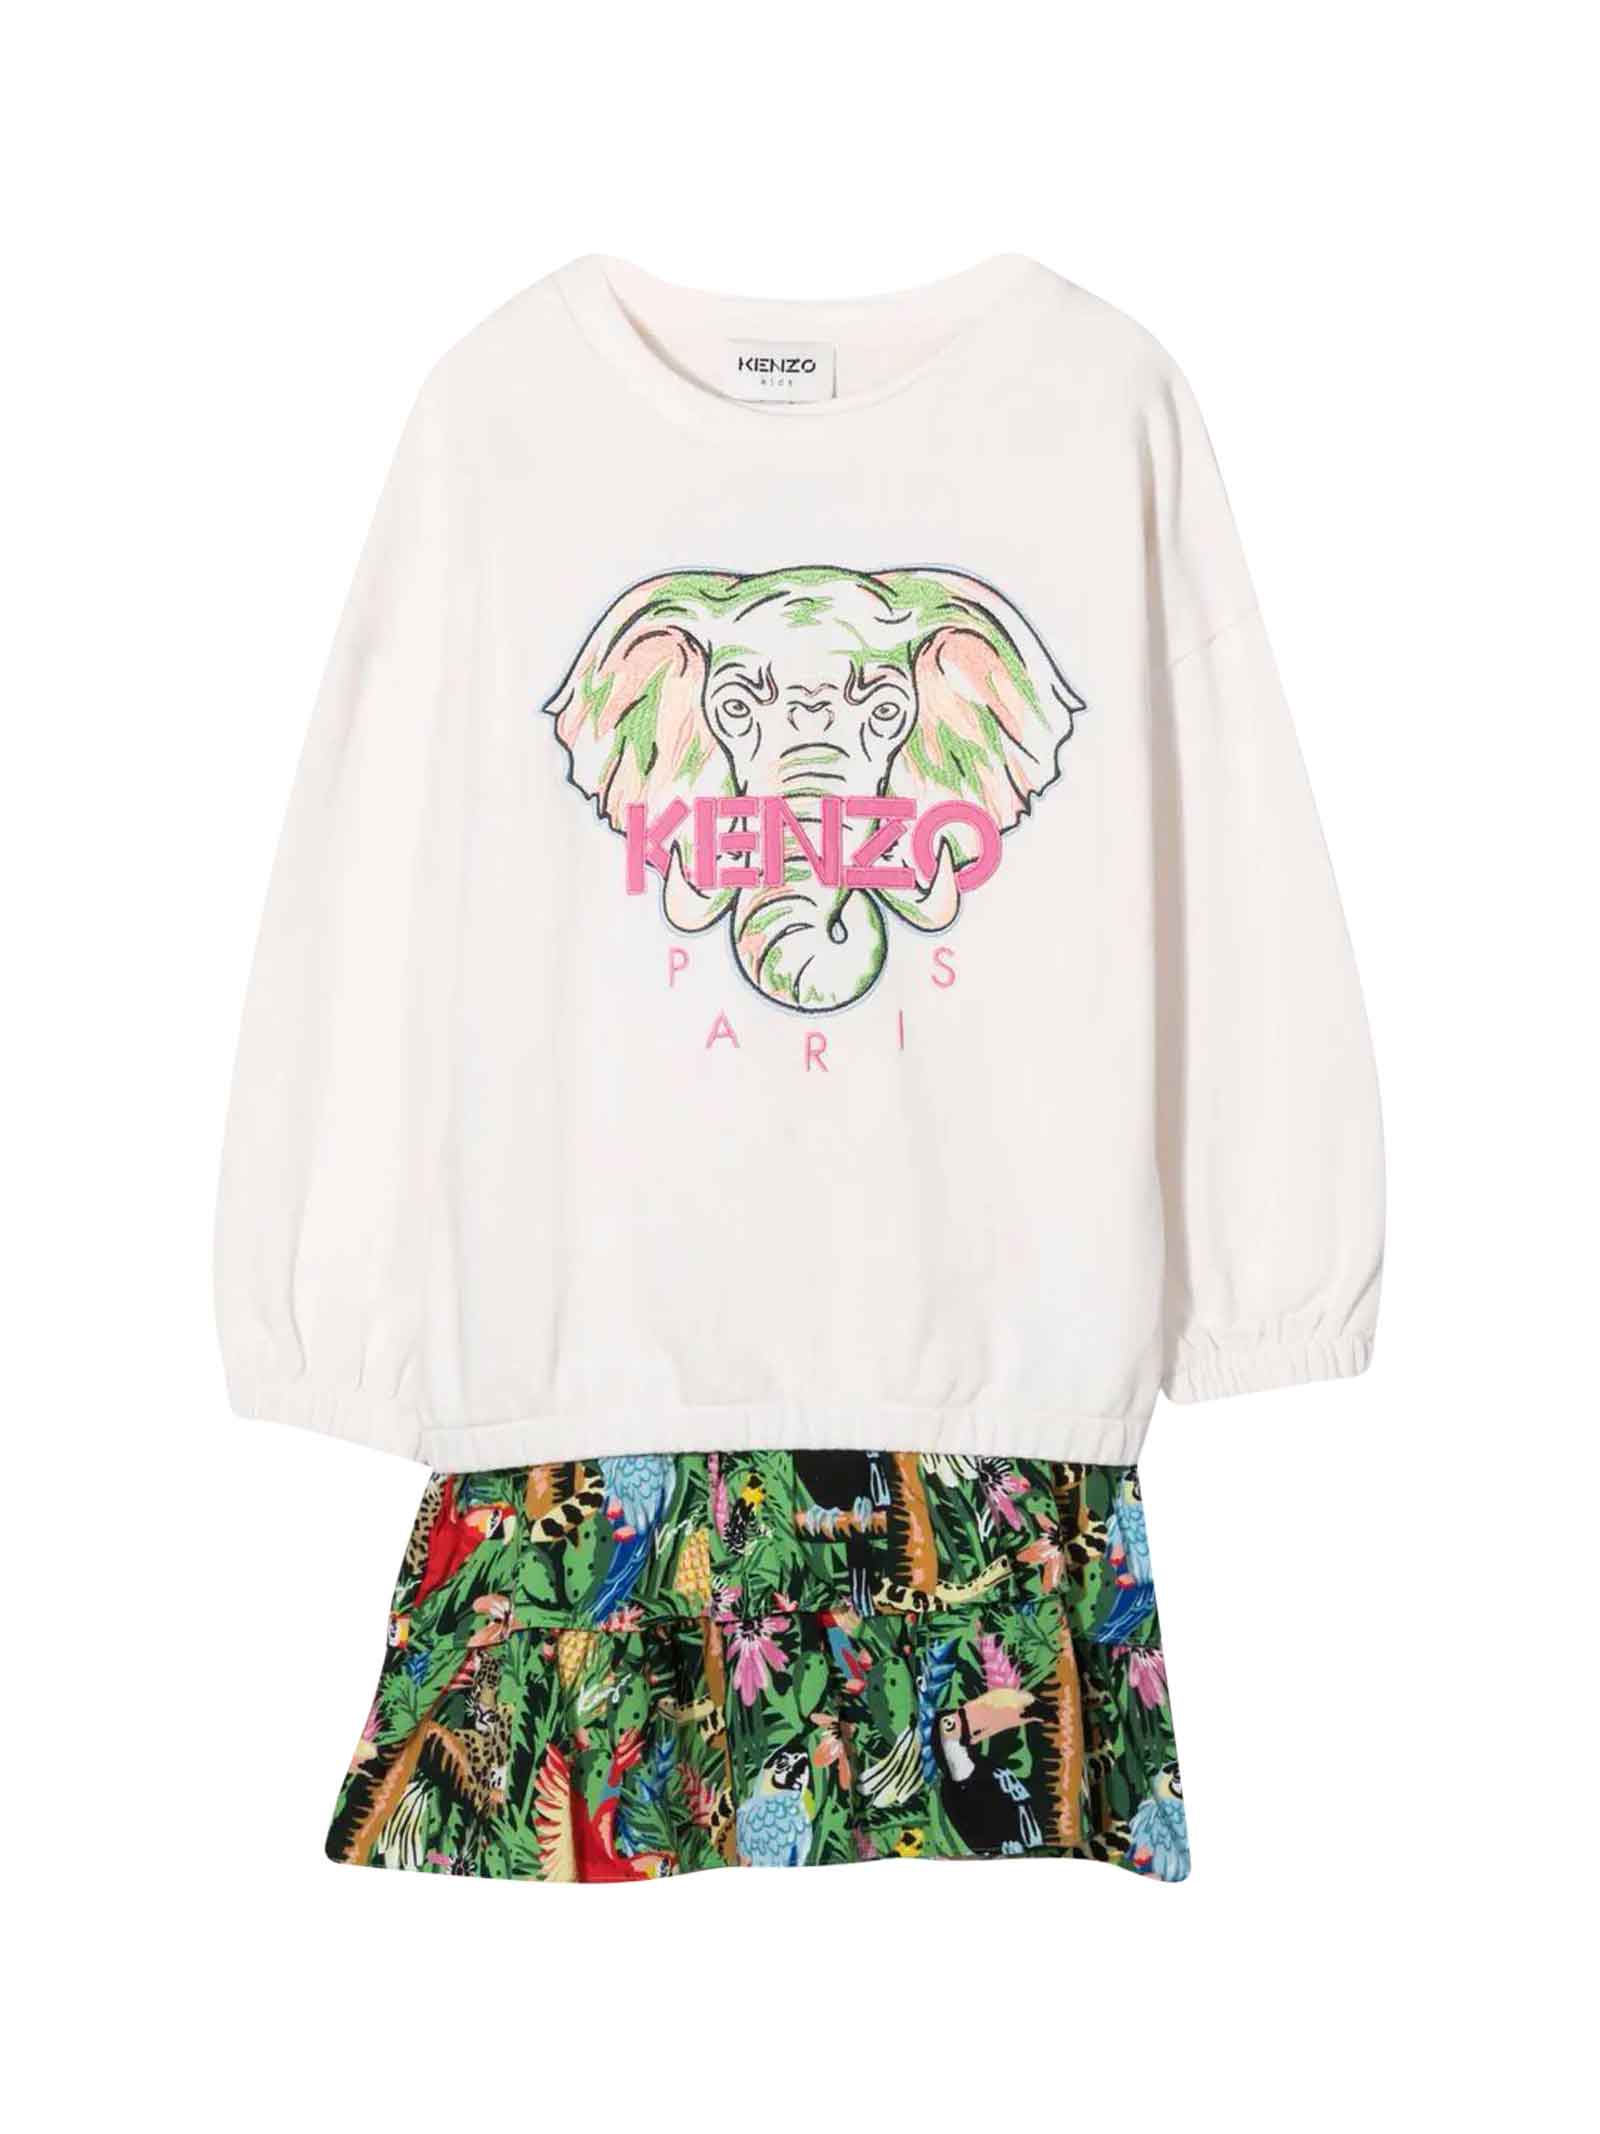 Kenzo Kids Girl Dress With White Sweatshirt And Multicolor Skirt, Embroidery With Front Logo, Round Neckline, Long Sleeves And Elasticated Cuffs By